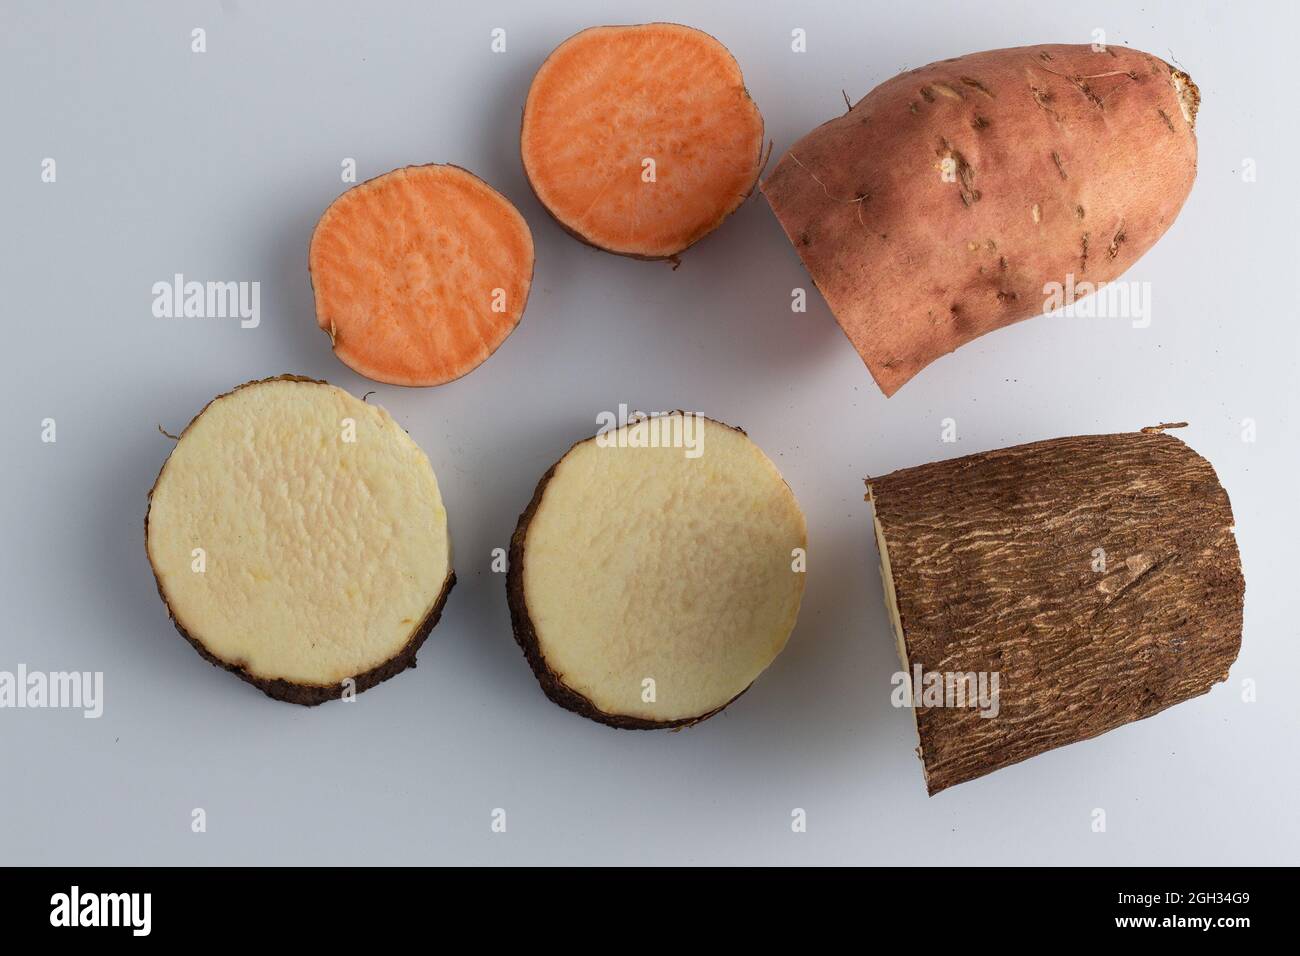 African yam and sweet potatoes Stock Photo